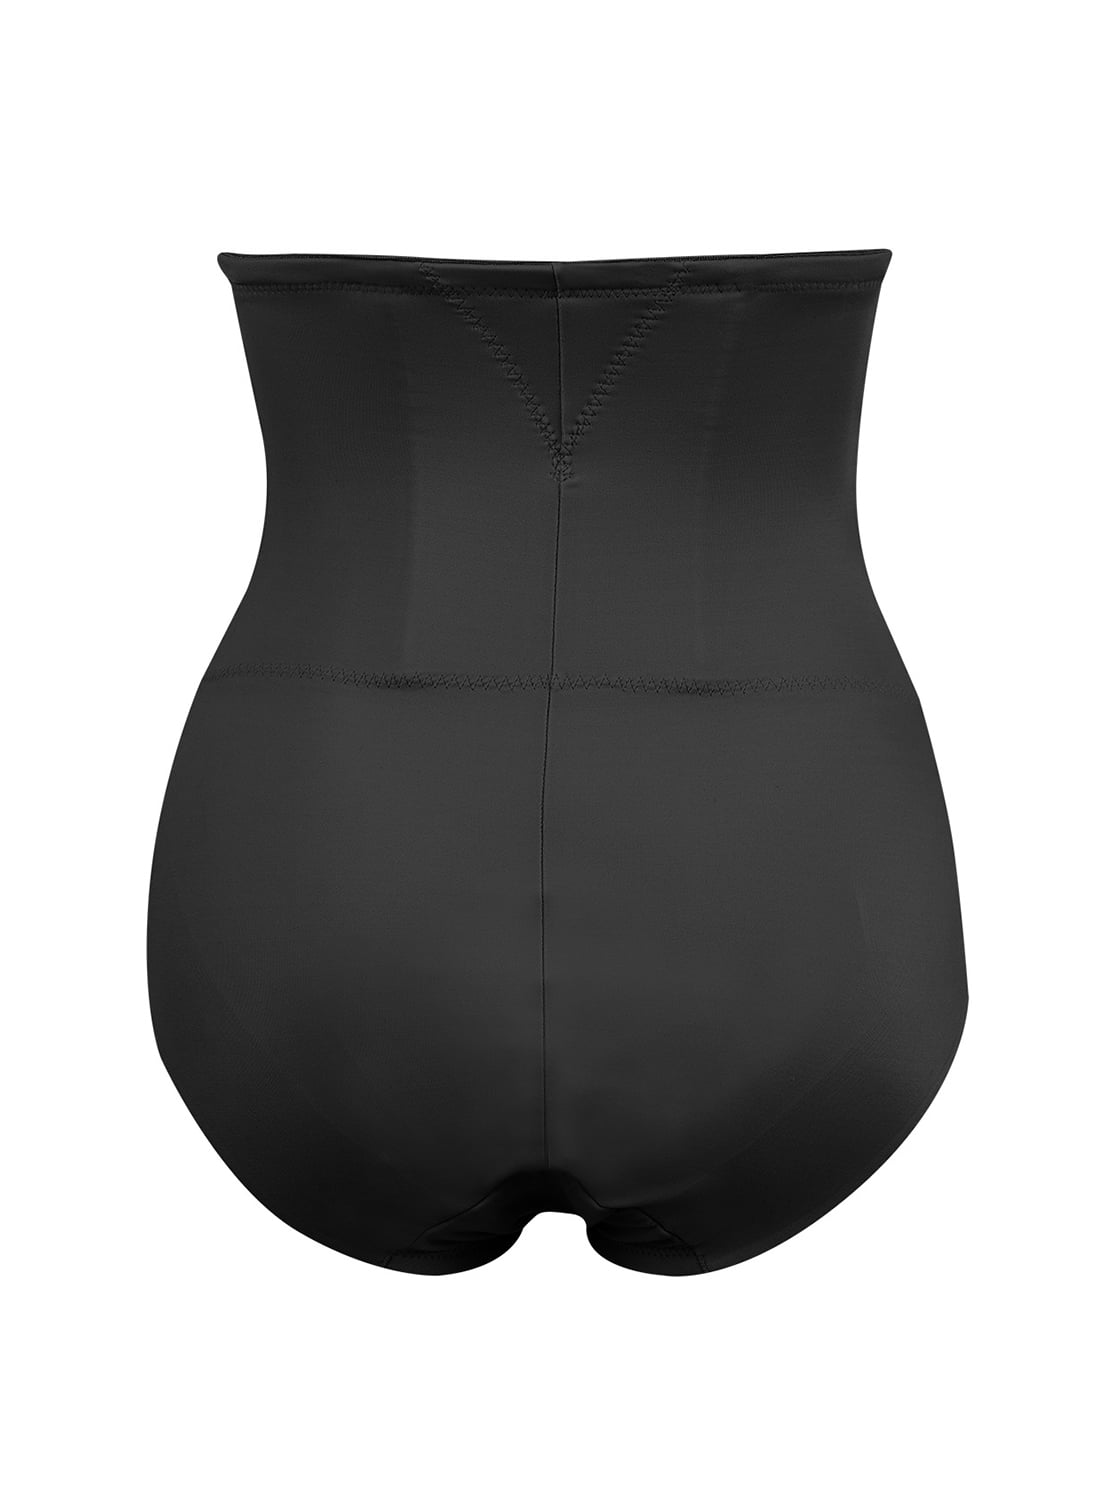 Naomi & Nicole Women's Firm Control Luxe Shaping with Back Magic High Waist  Shaping Brief Shapewear 